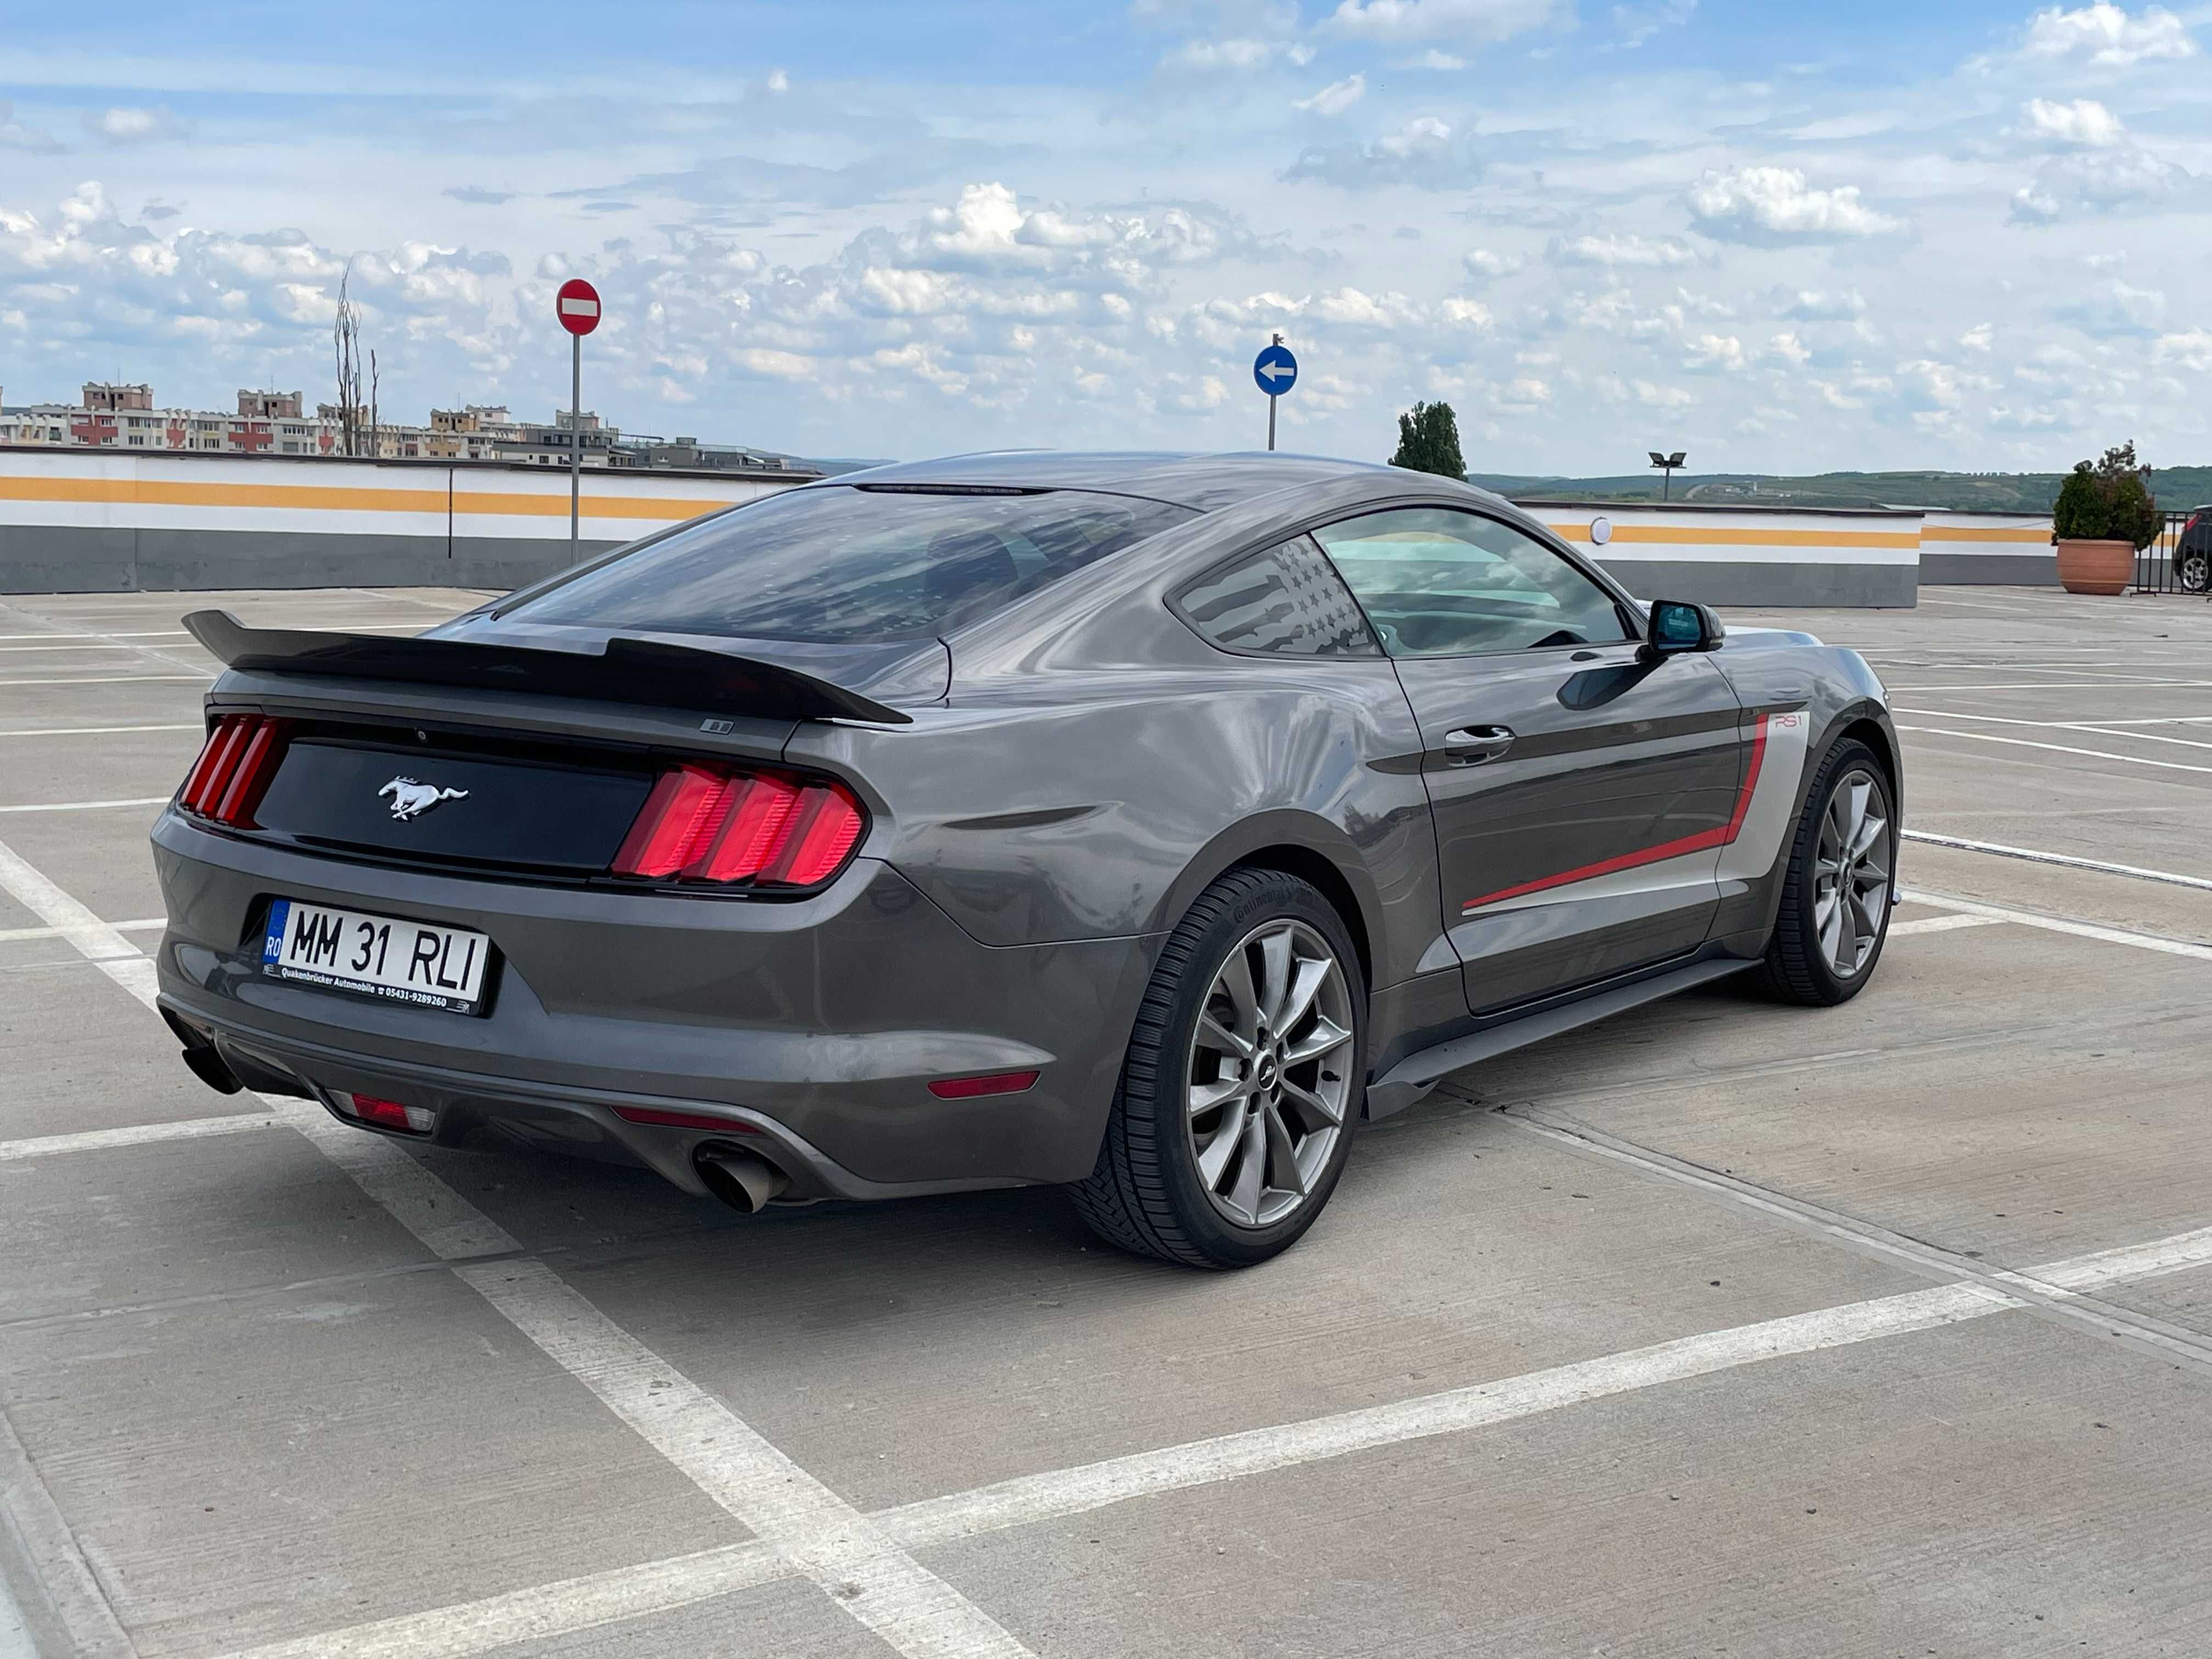 VAND URGENT Ford Mustang 2015 2.3L